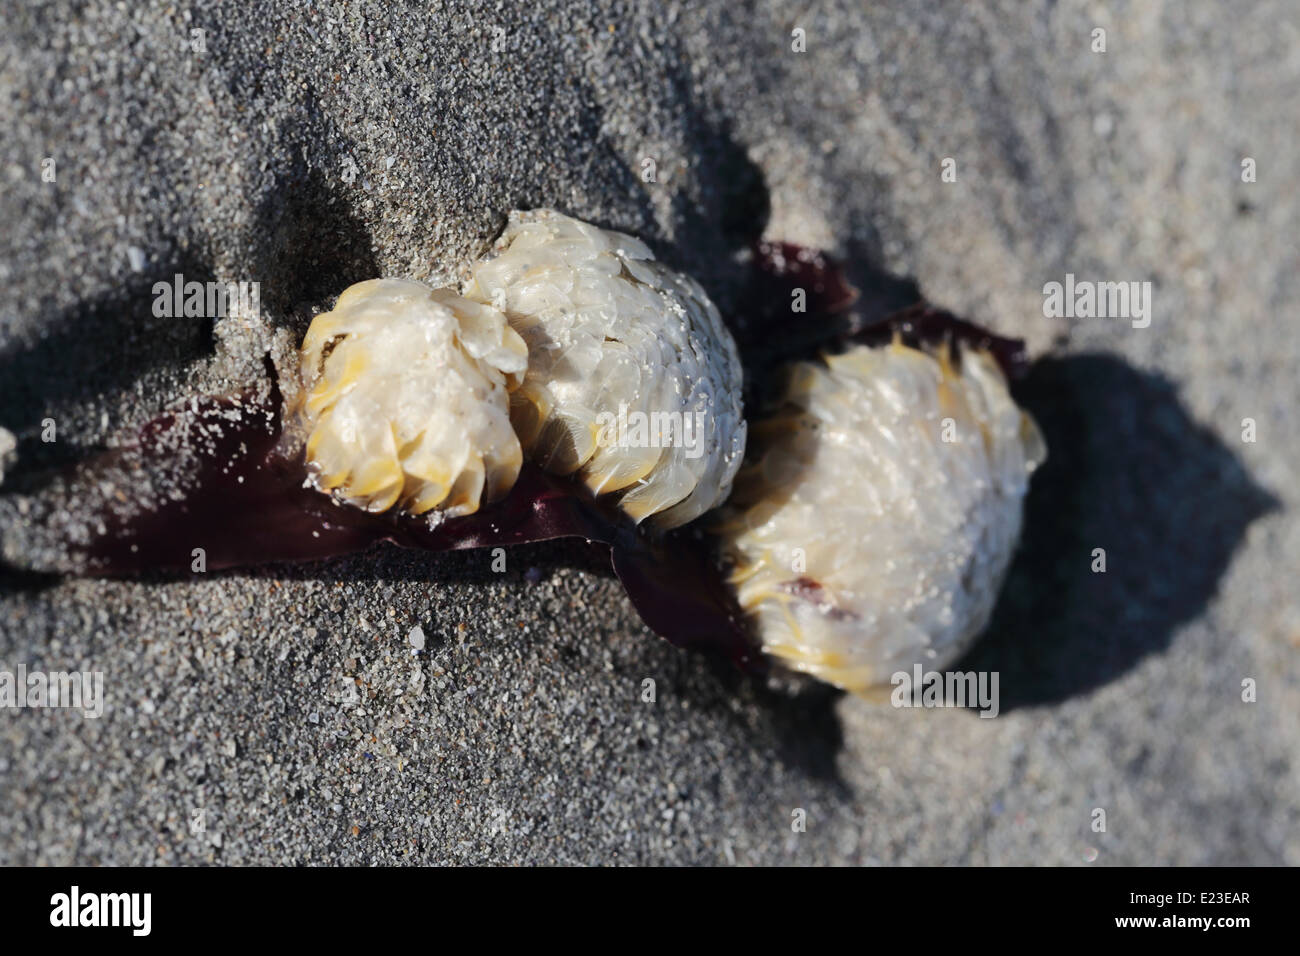 Sea animal growing on a seaweed leaf, washed up on the beach in Paternoster, South Africa Stock Photo